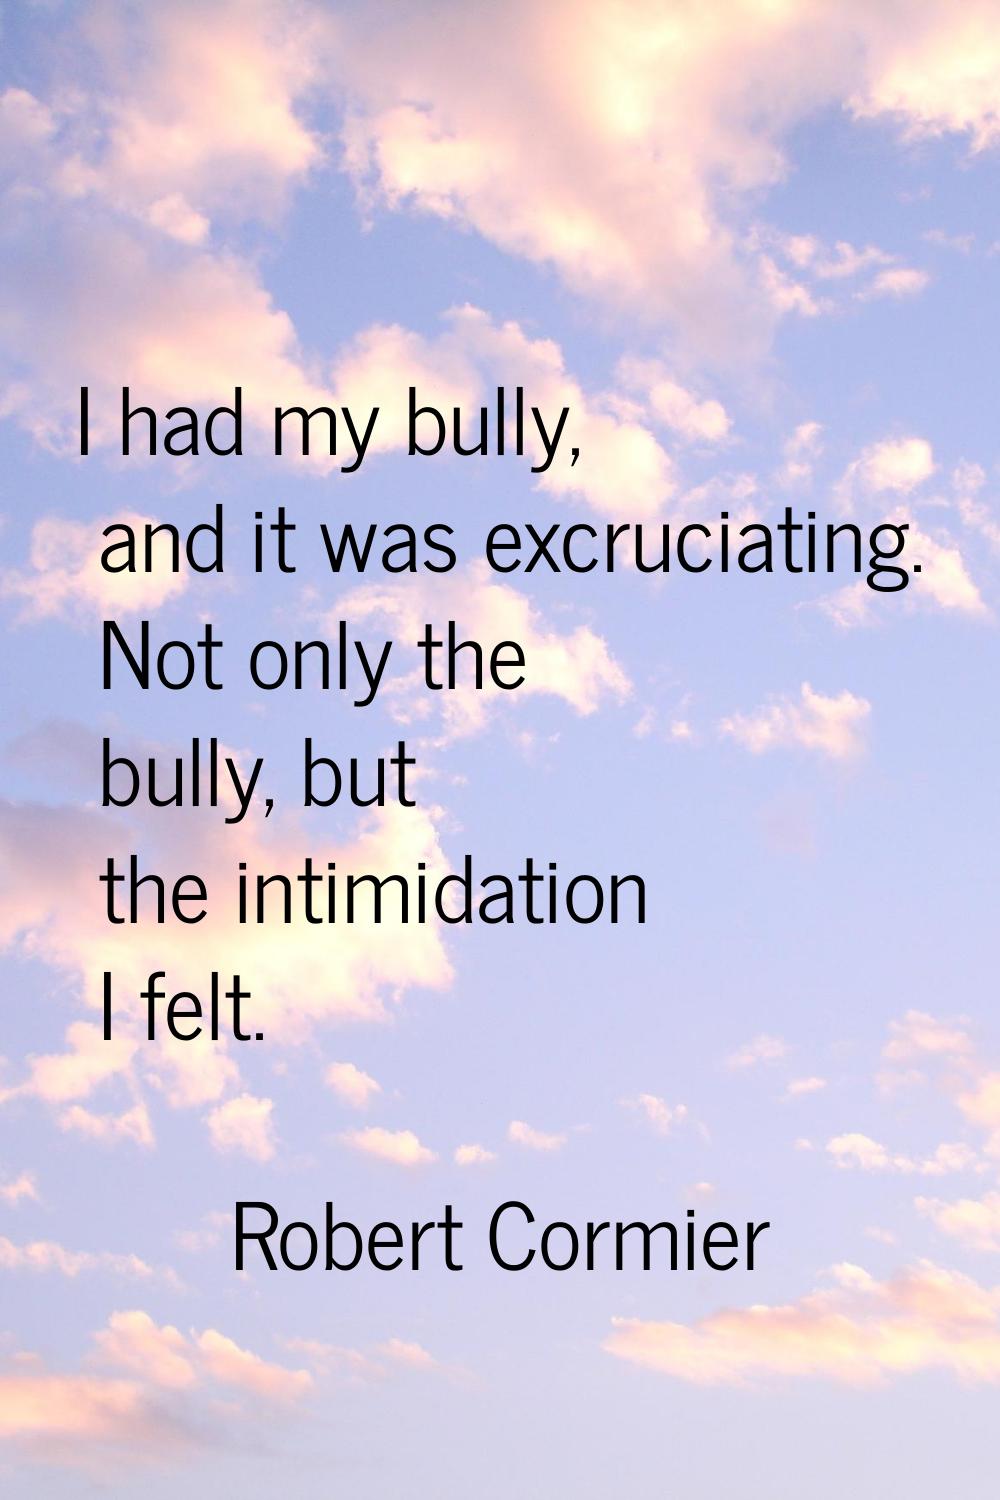 I had my bully, and it was excruciating. Not only the bully, but the intimidation I felt.